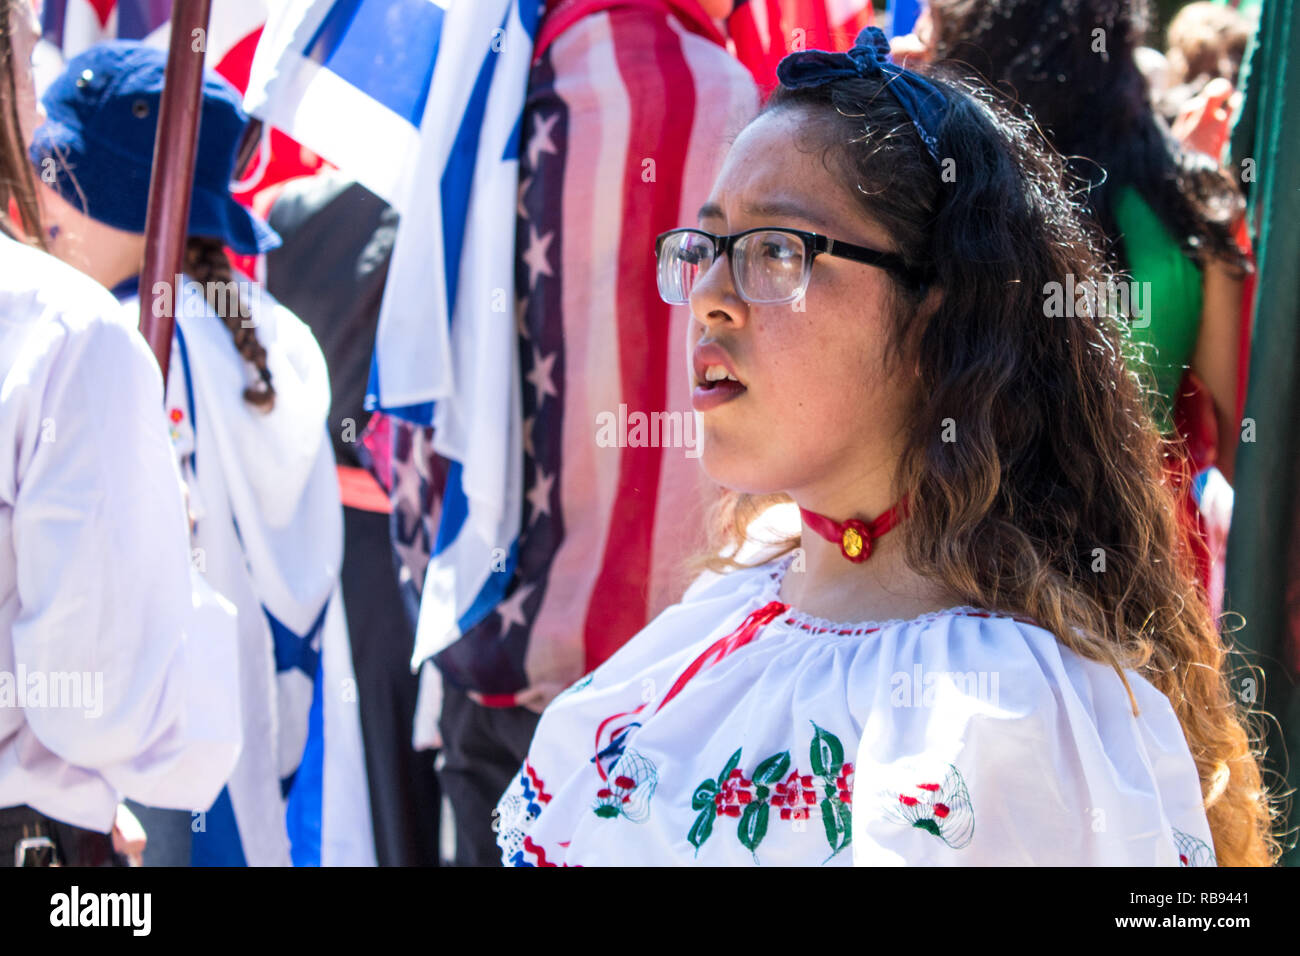 A portrait of a beautiful Costa Rican woman celebrating the independence day of Costa Rica Stock Photo